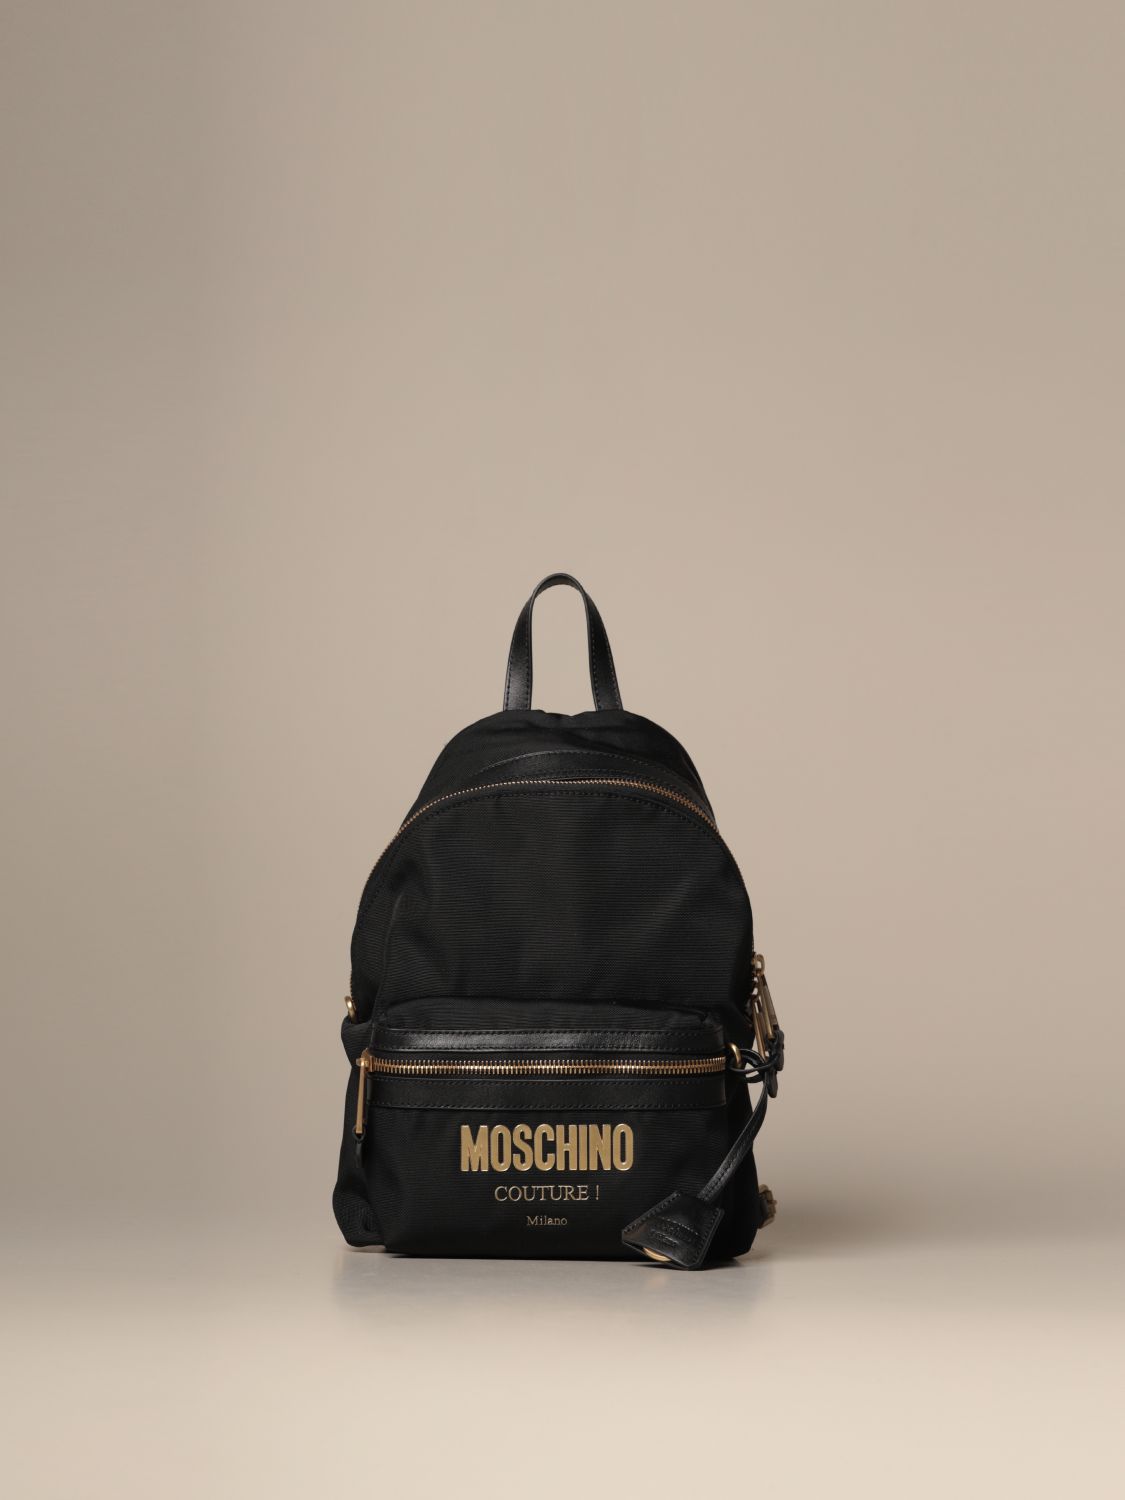 Backpack Moschino Couture 7638 8205 